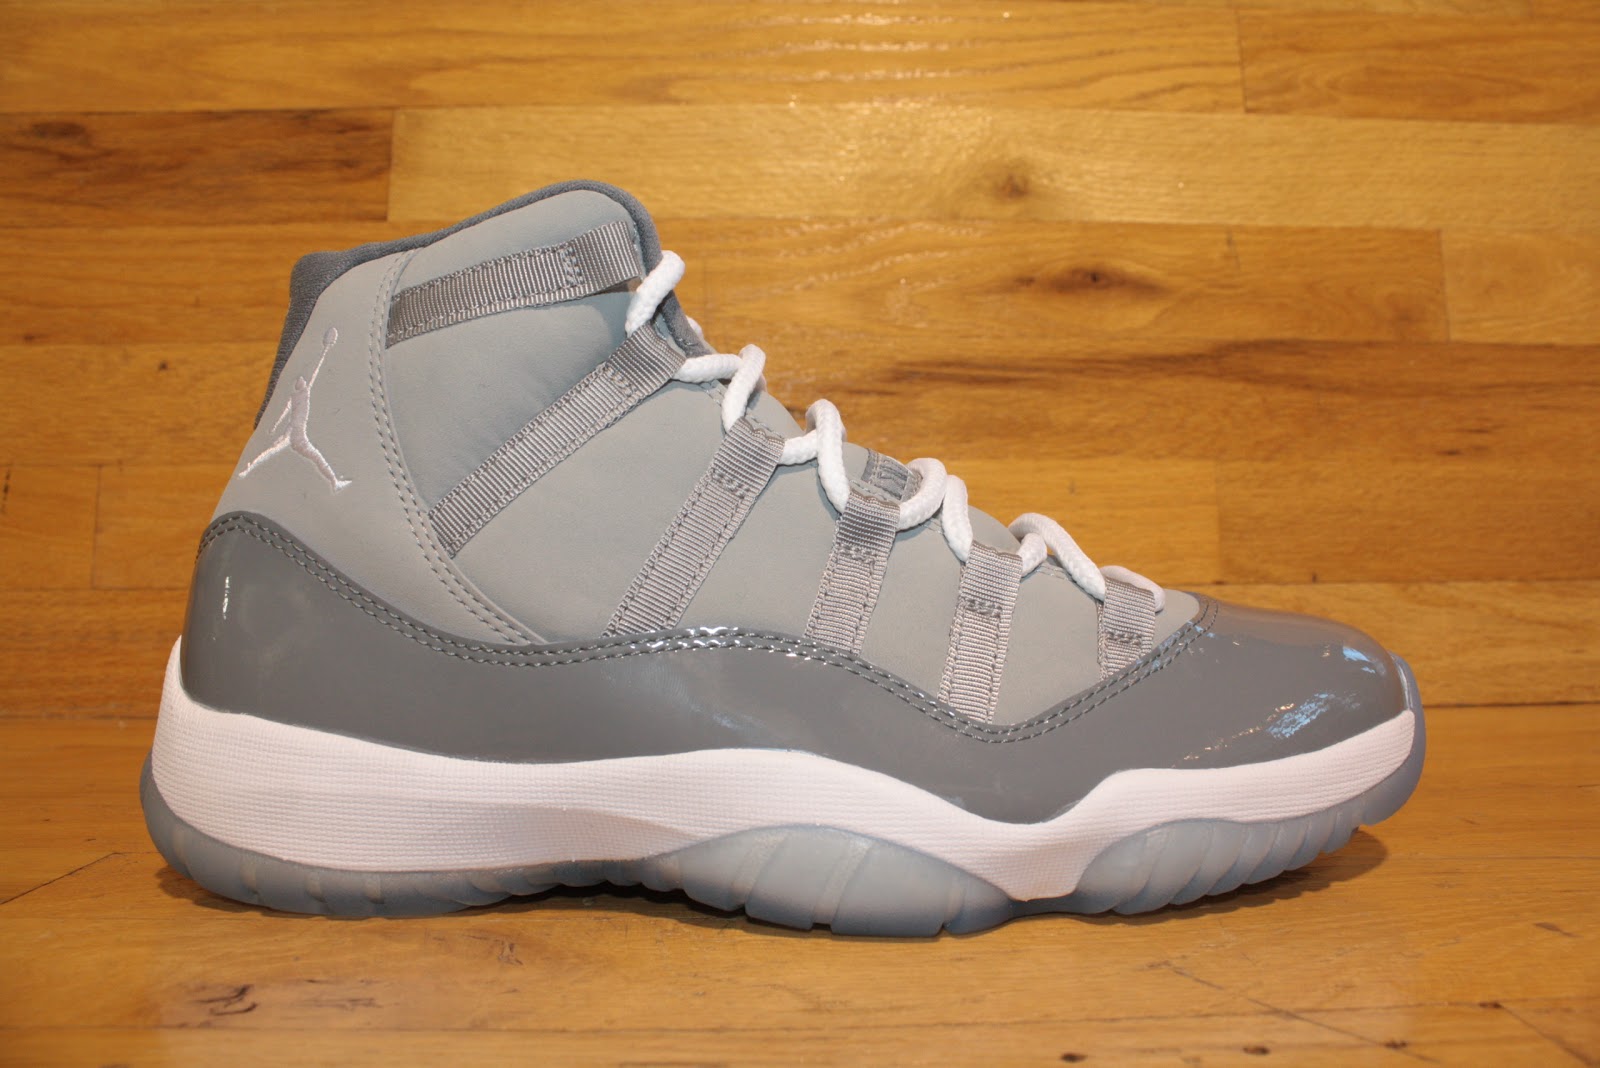 Dr. Jays Stores New Air Jordan 11 (XI) Cool Grey Limited Edition